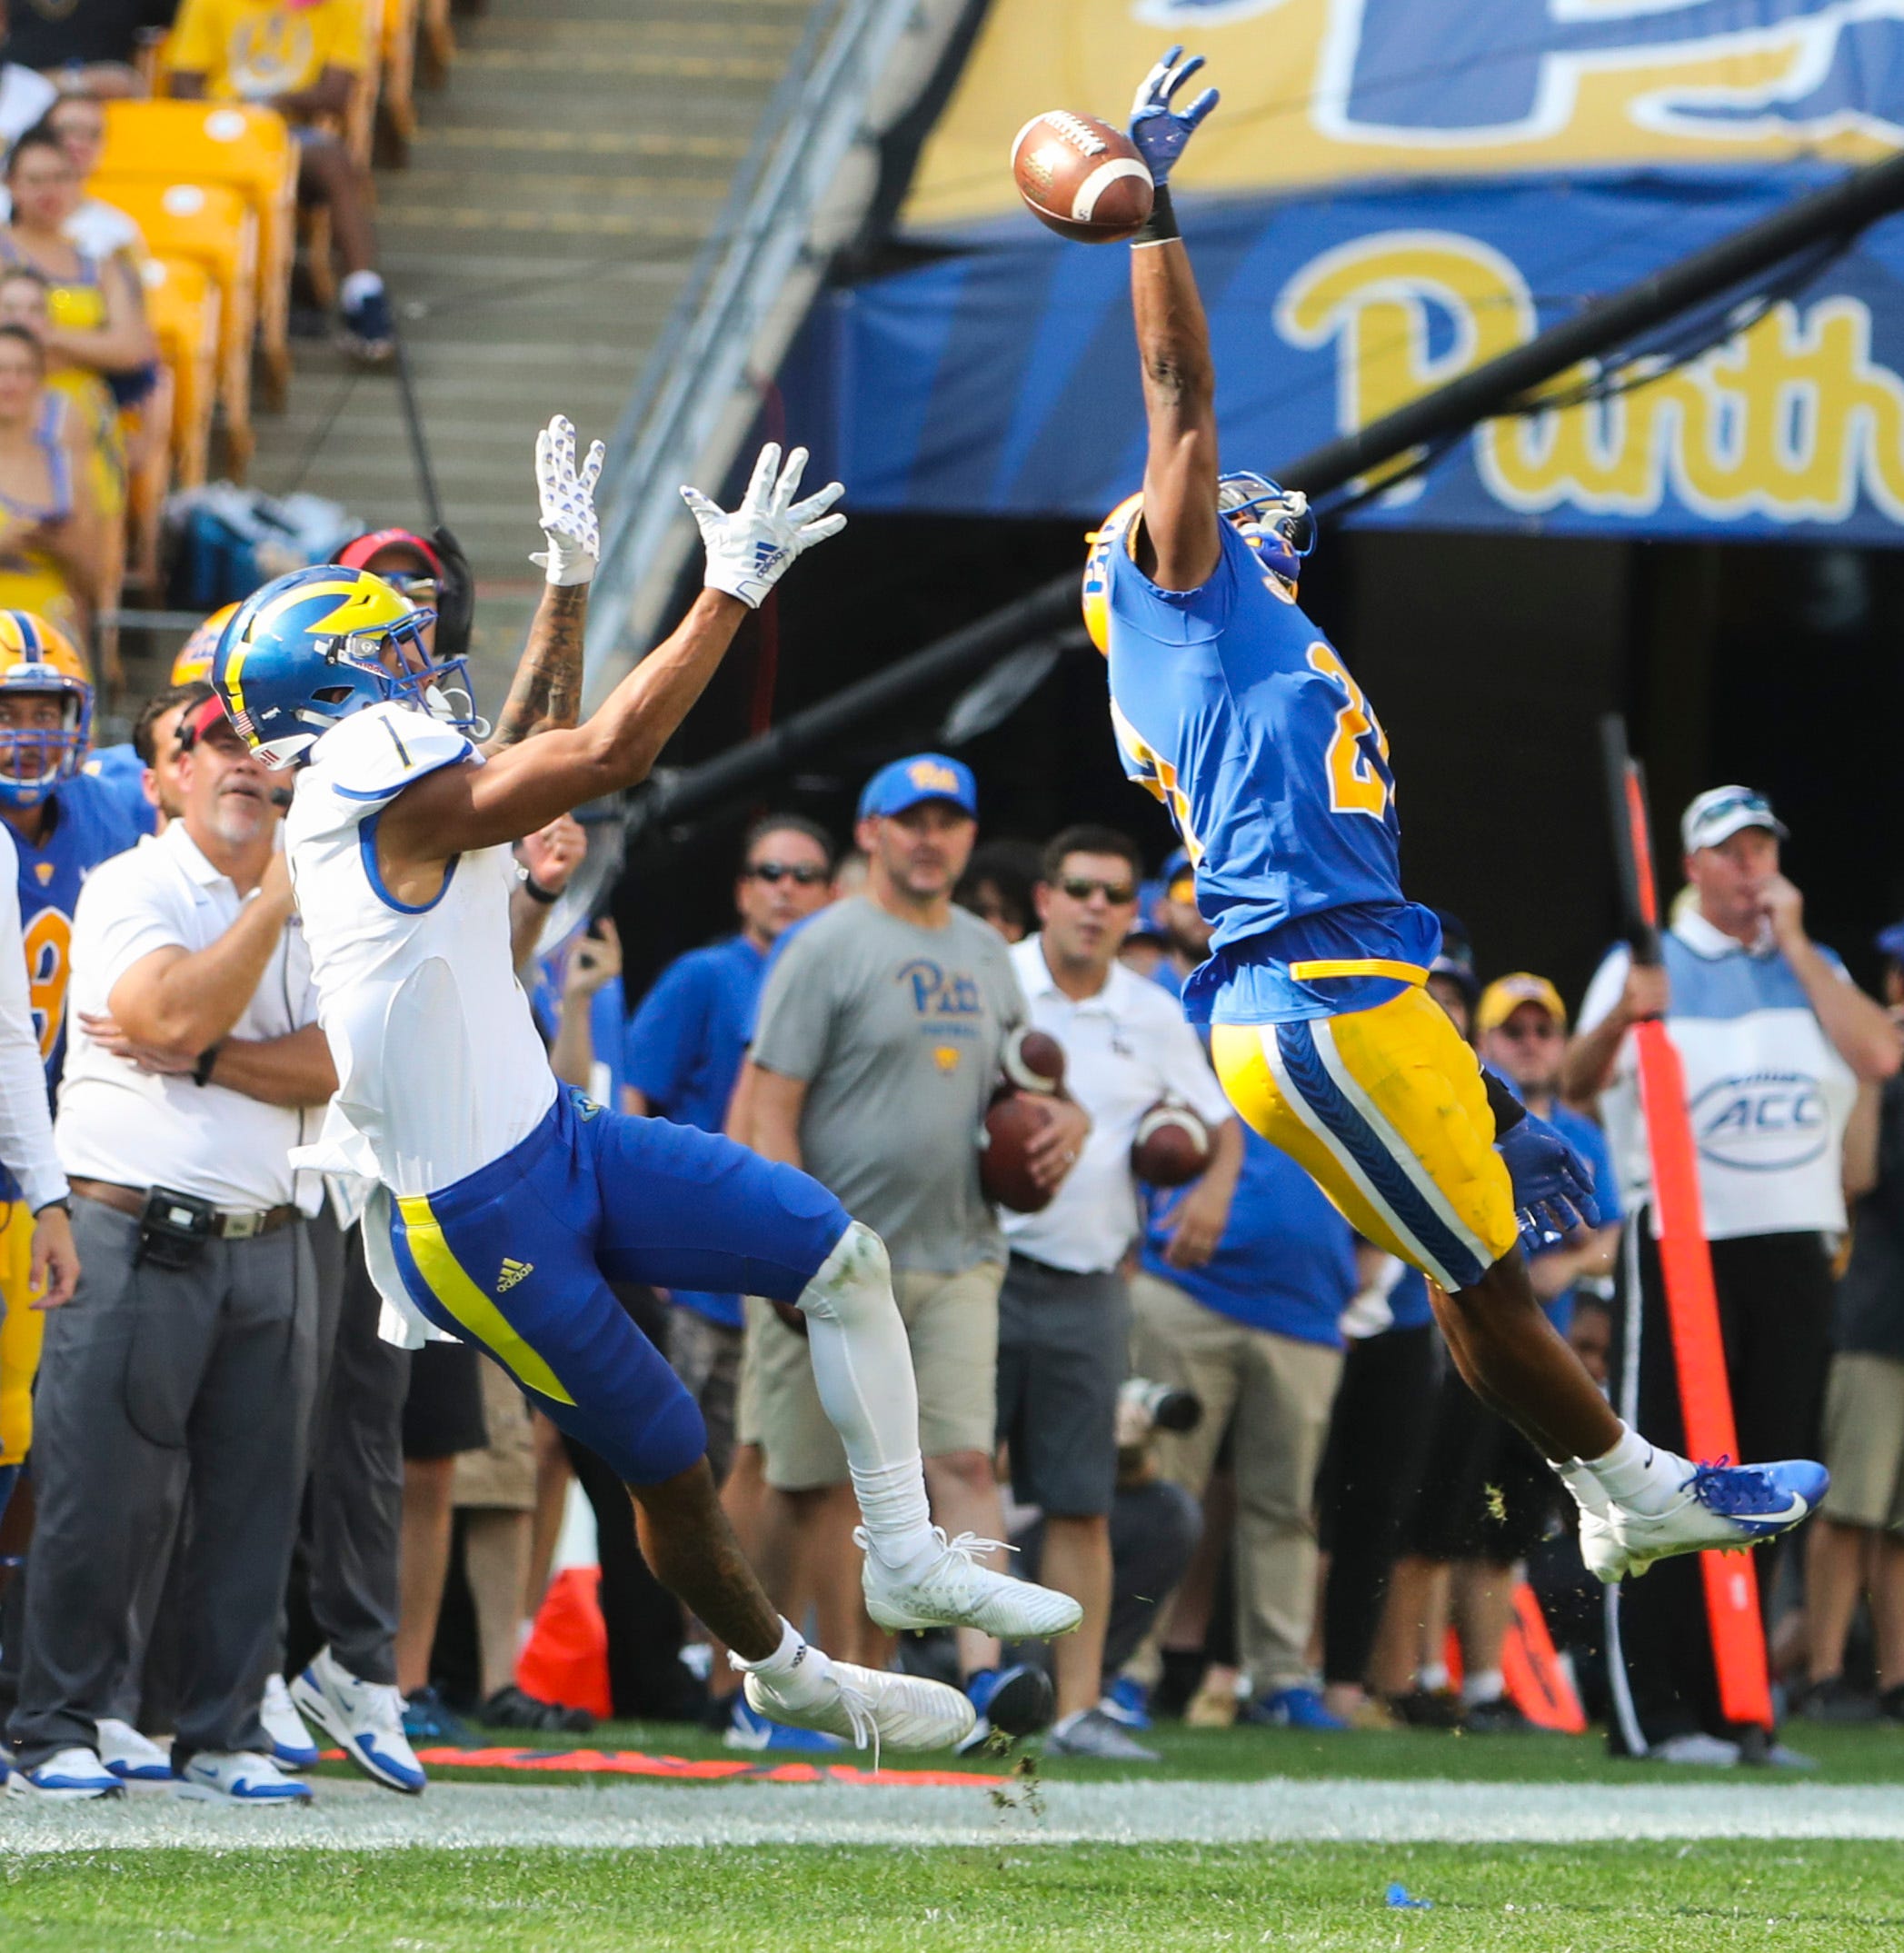 Delaware wide receiver Thyrick Pitts has a long third down pass tipped away by Pitt defender Damarri Mathis late in the fourth quarter of Delaware's 17-14 loss at Heinz Field Saturday.